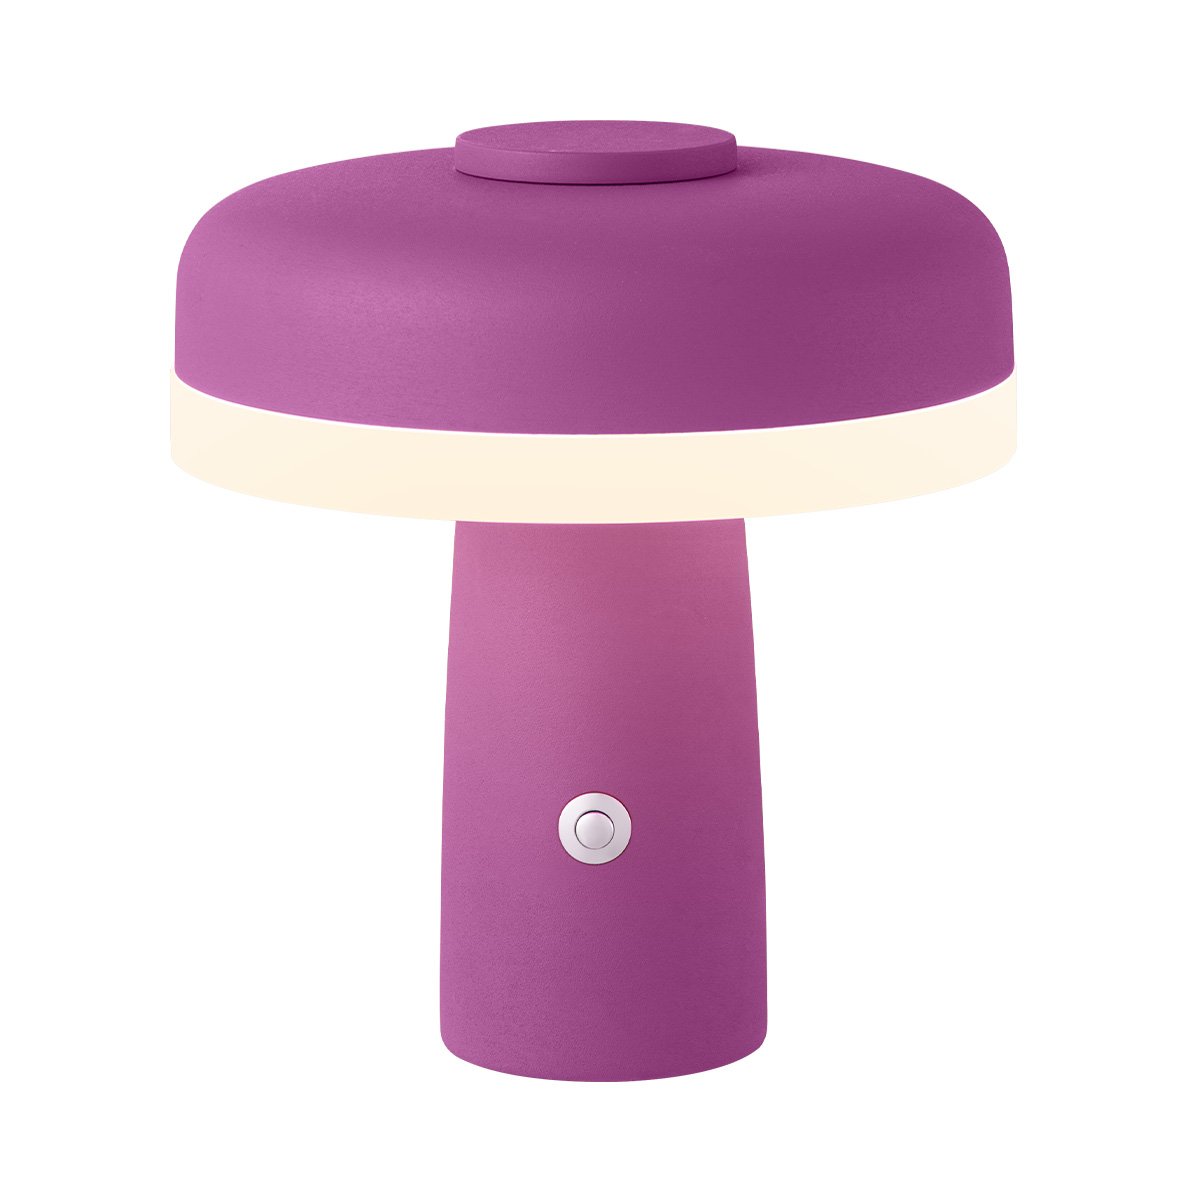 Tangla lighting - TLT7499-01RD - LED Table lamp - rechargeable metal and glass - purple - rechargeable